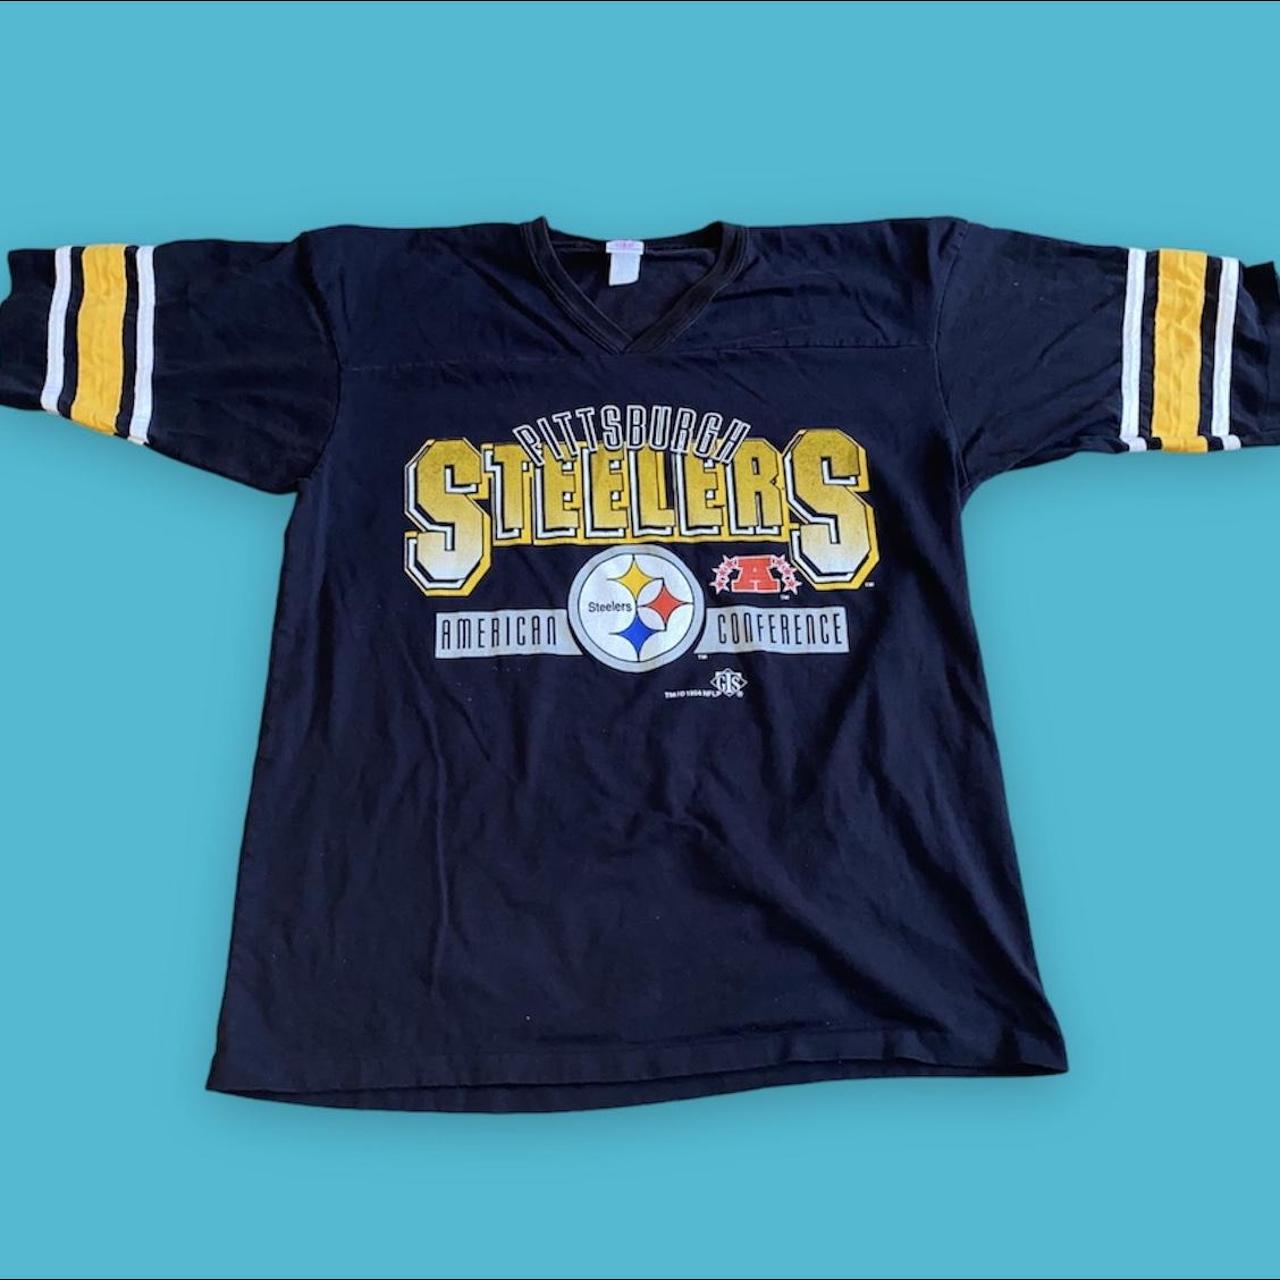 Vintage Steelers Conference Champs T-Shirt (1990s)